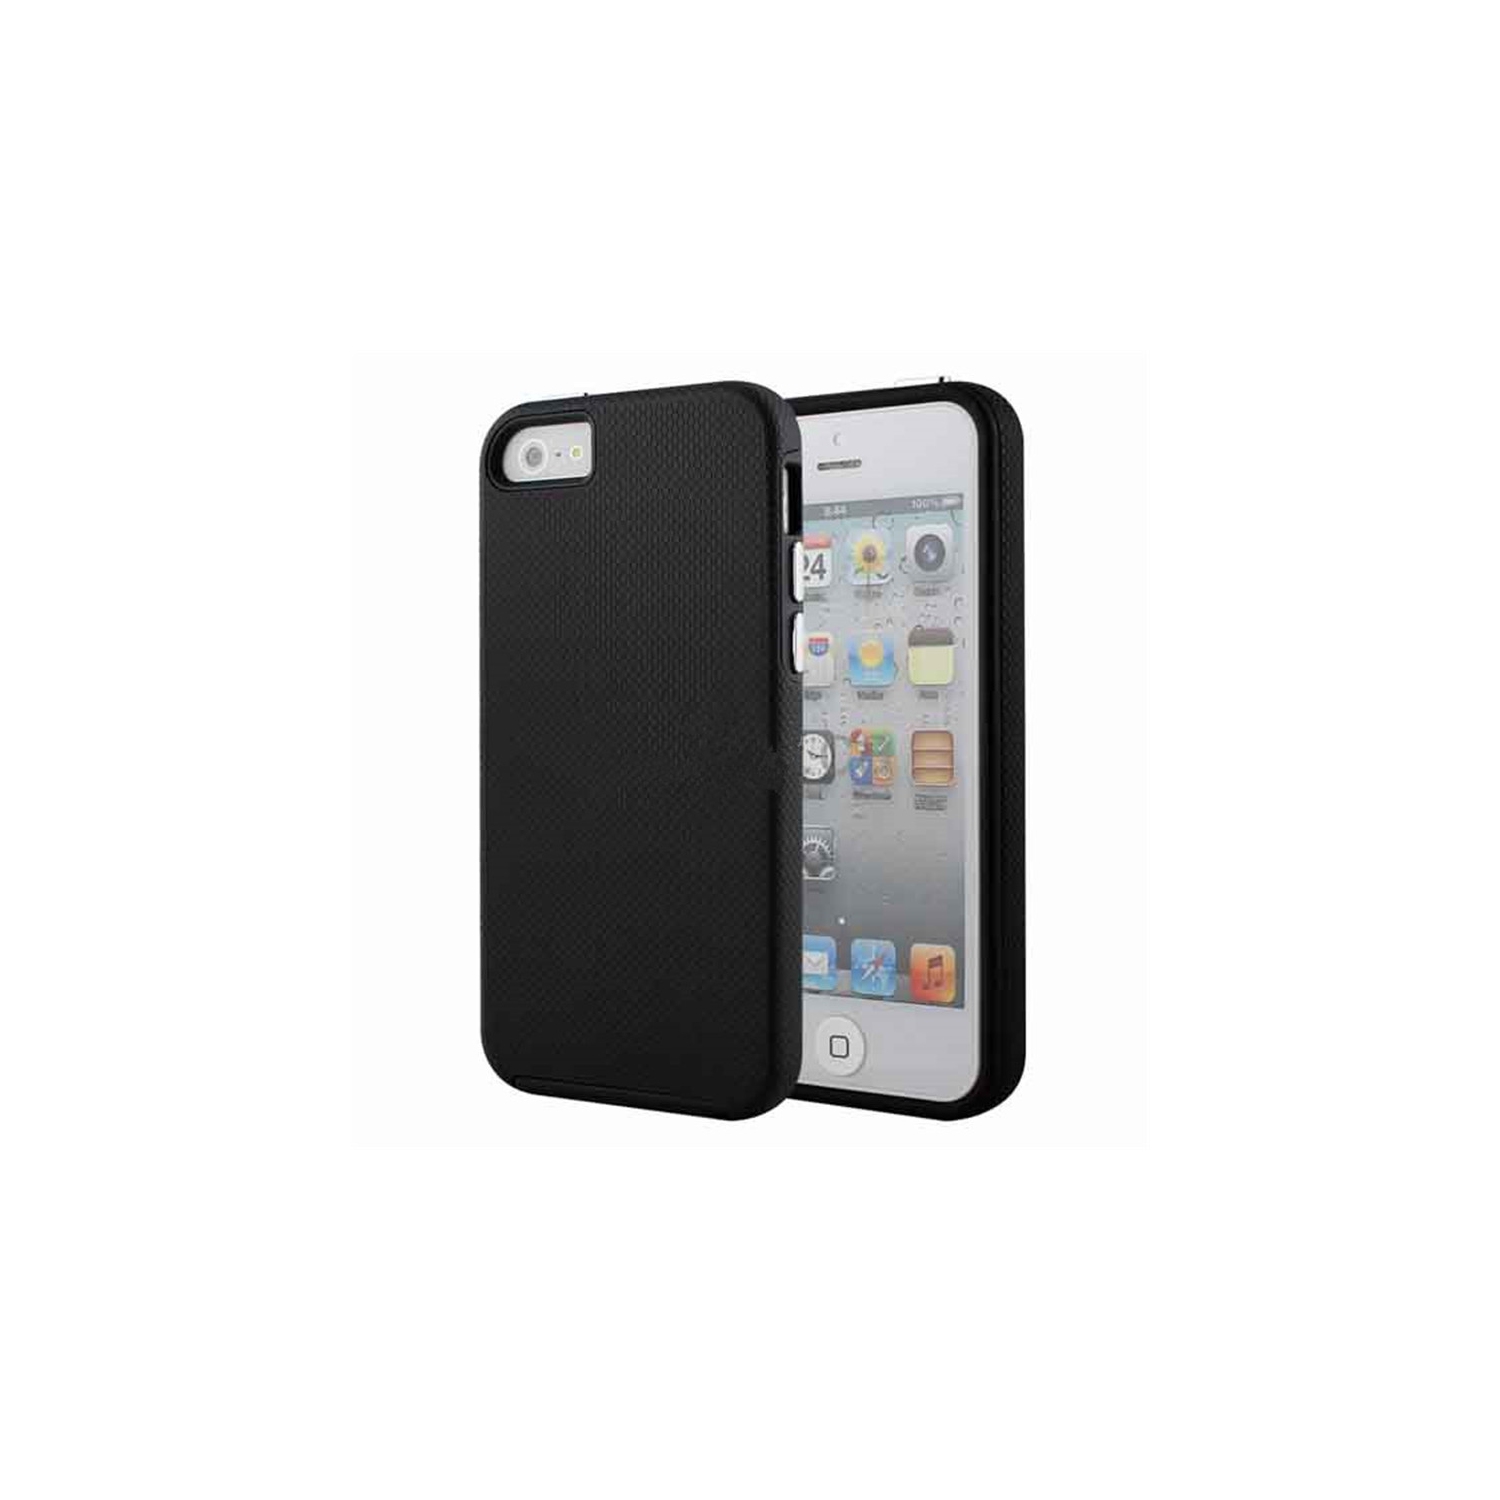 【CSmart】 Slim Fitted Hybrid Hard PC Shell Shockproof Scratch Resistant Case Cover for iPhone 5 / 5S / SE, Black